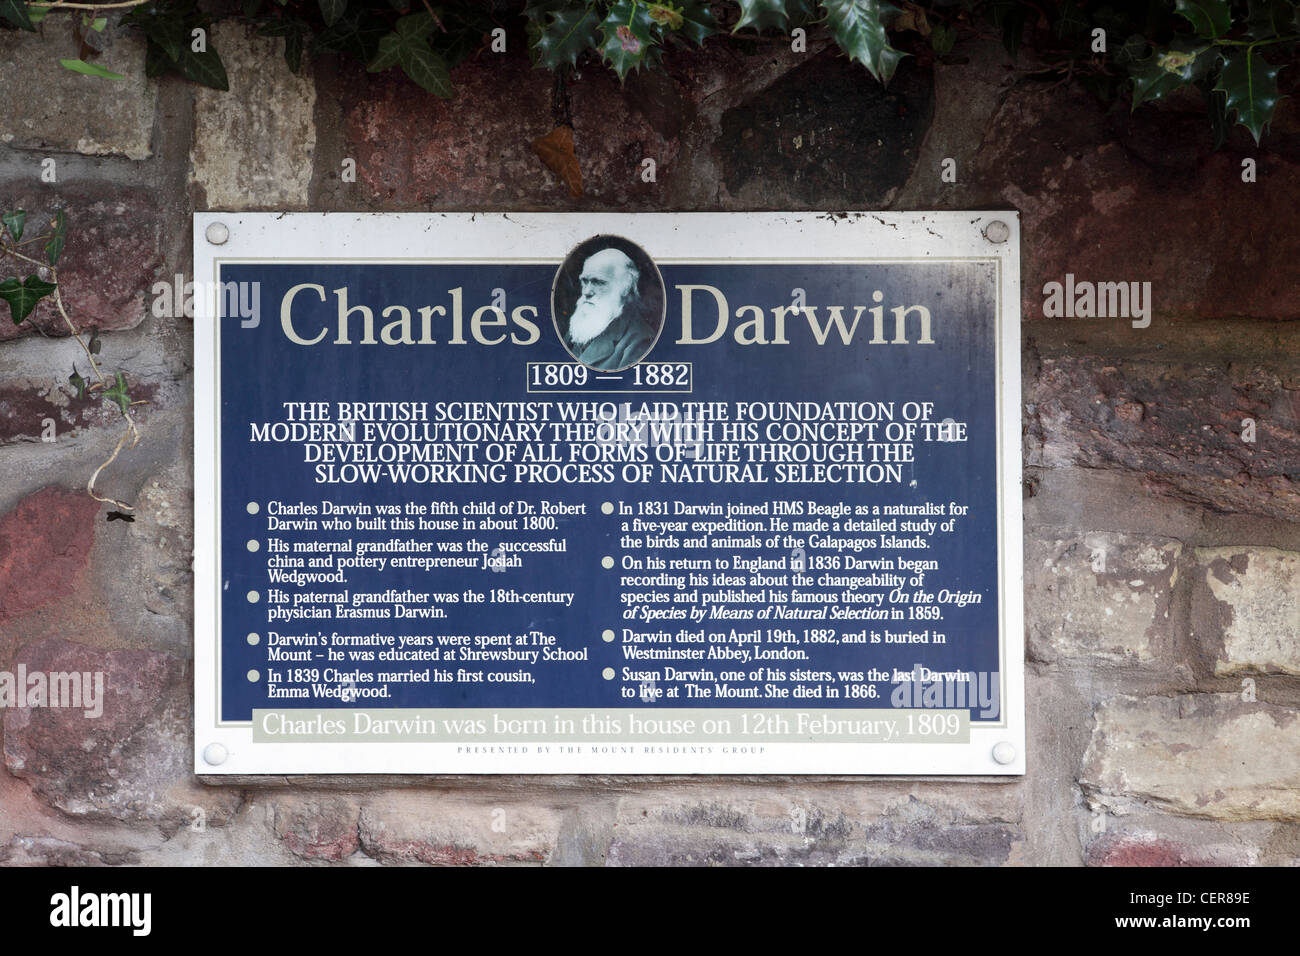 One of (7) images related to The Mount, birthplace of Charles Darwin. Both internal and external images apply in photographer's library at this site. Stock Photo